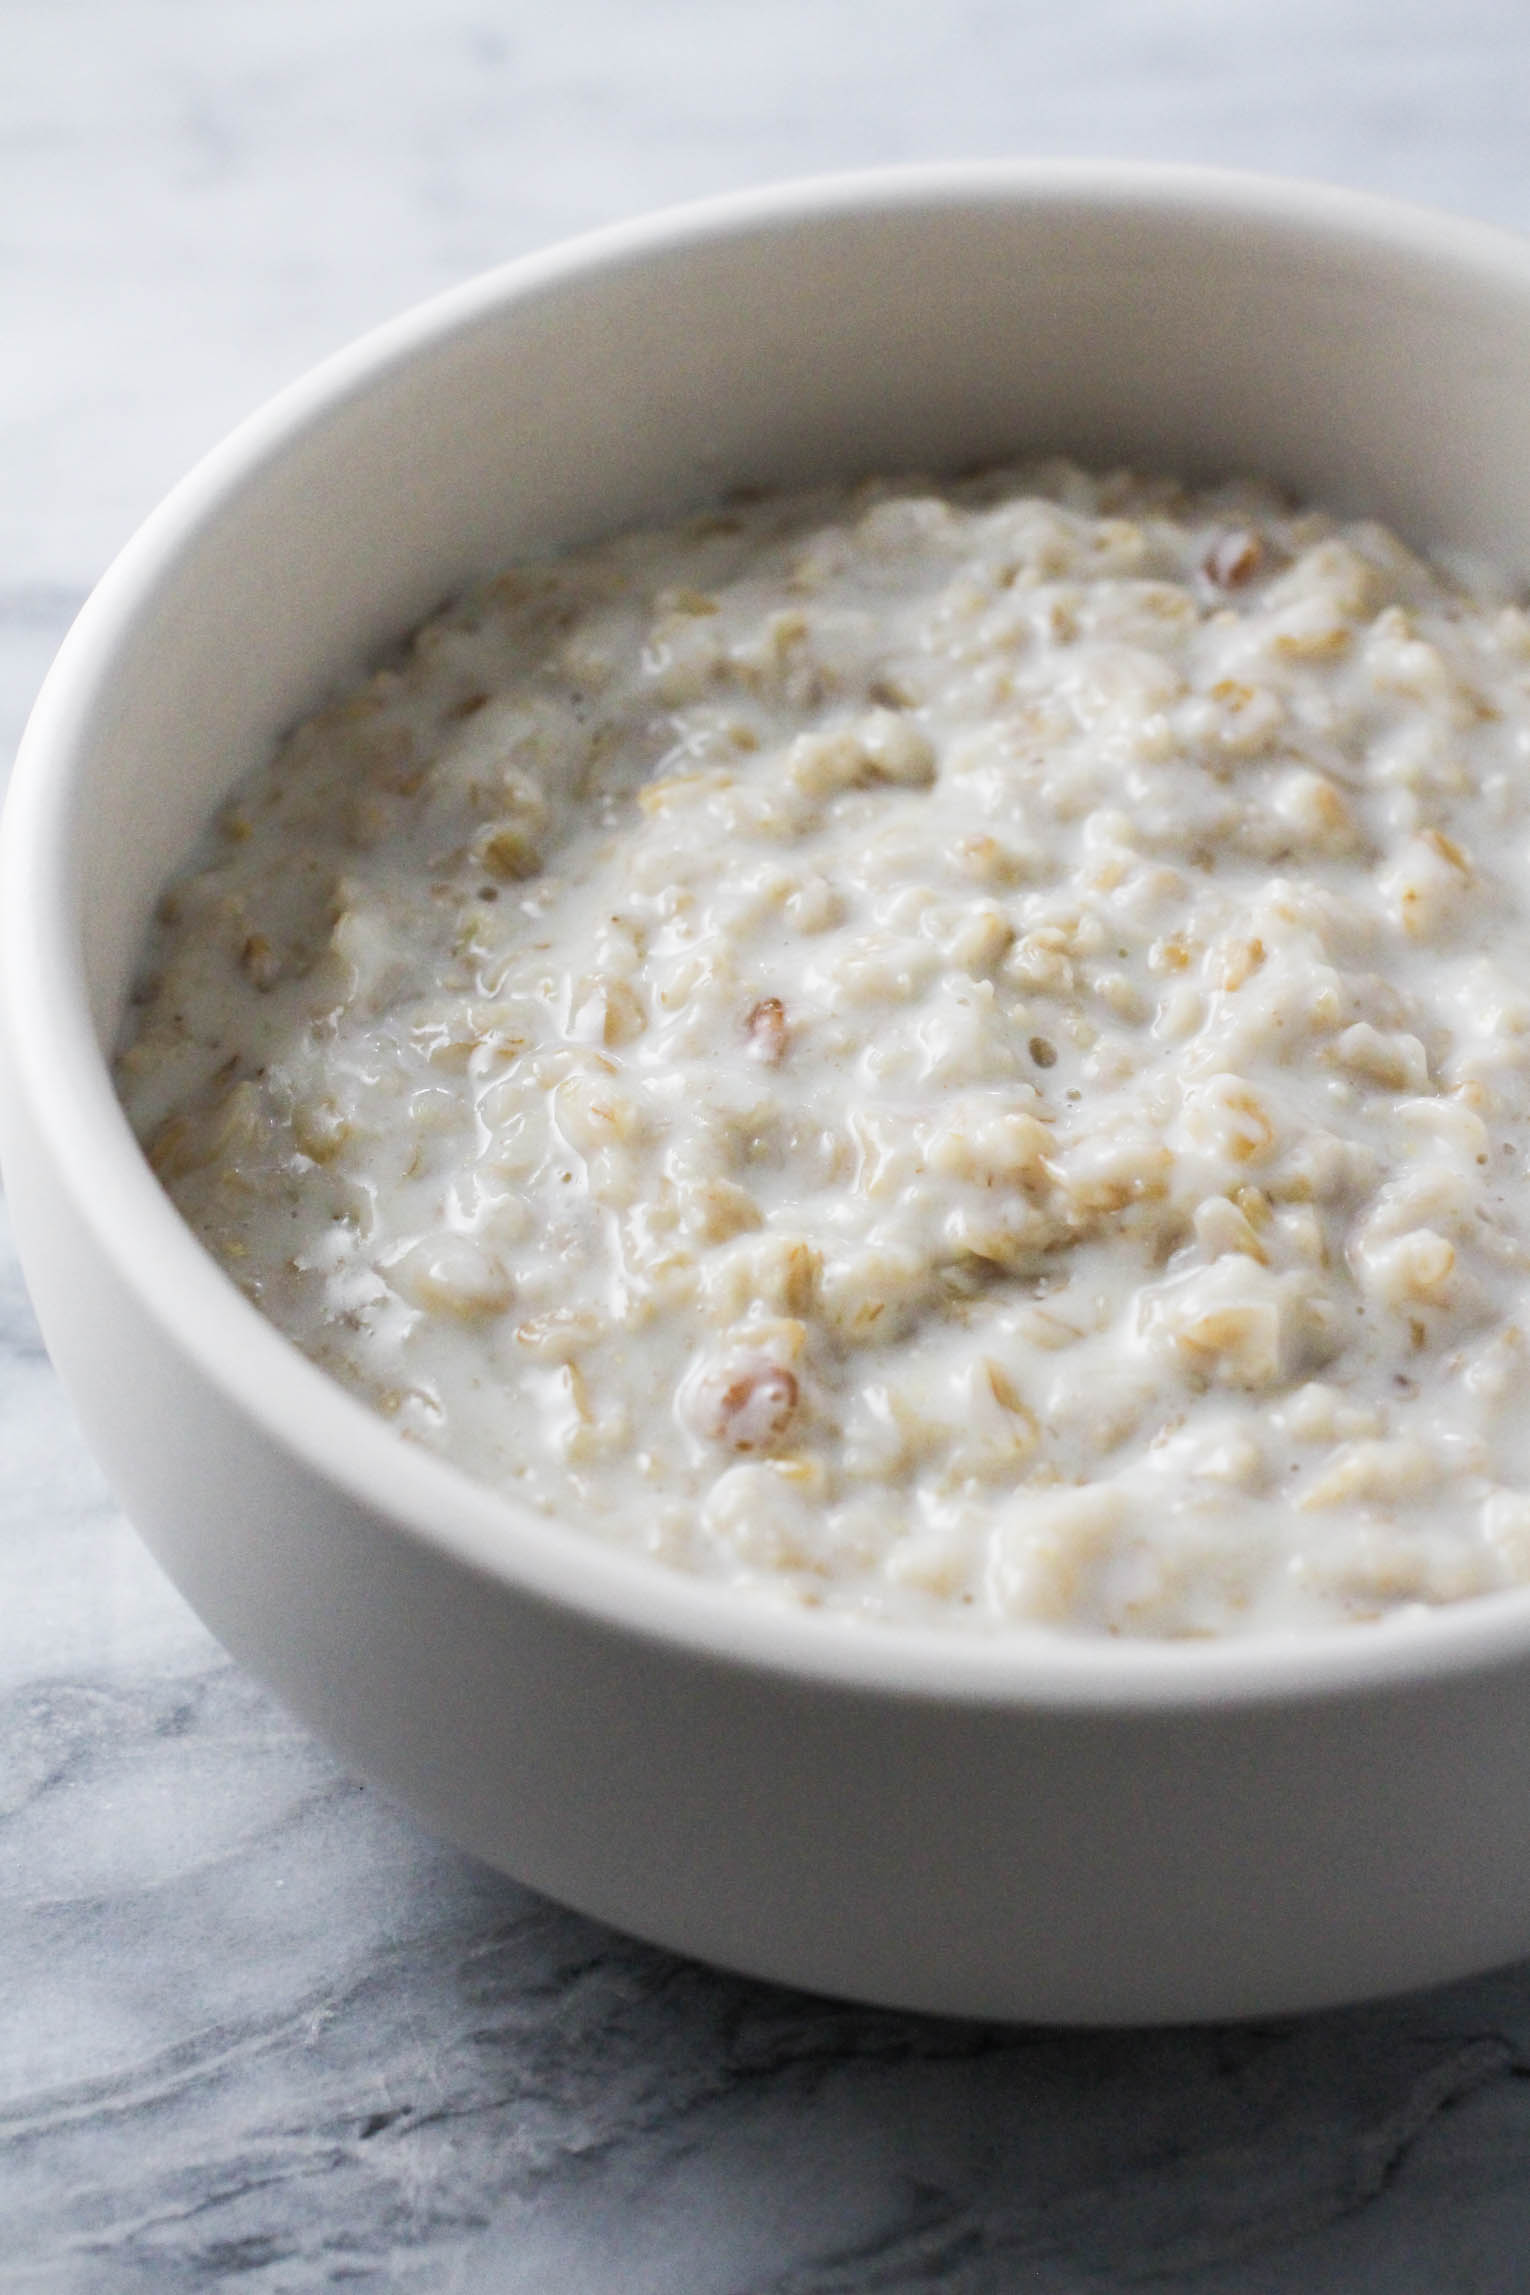 Creamy oatmeal in a bowl standing on marble background.